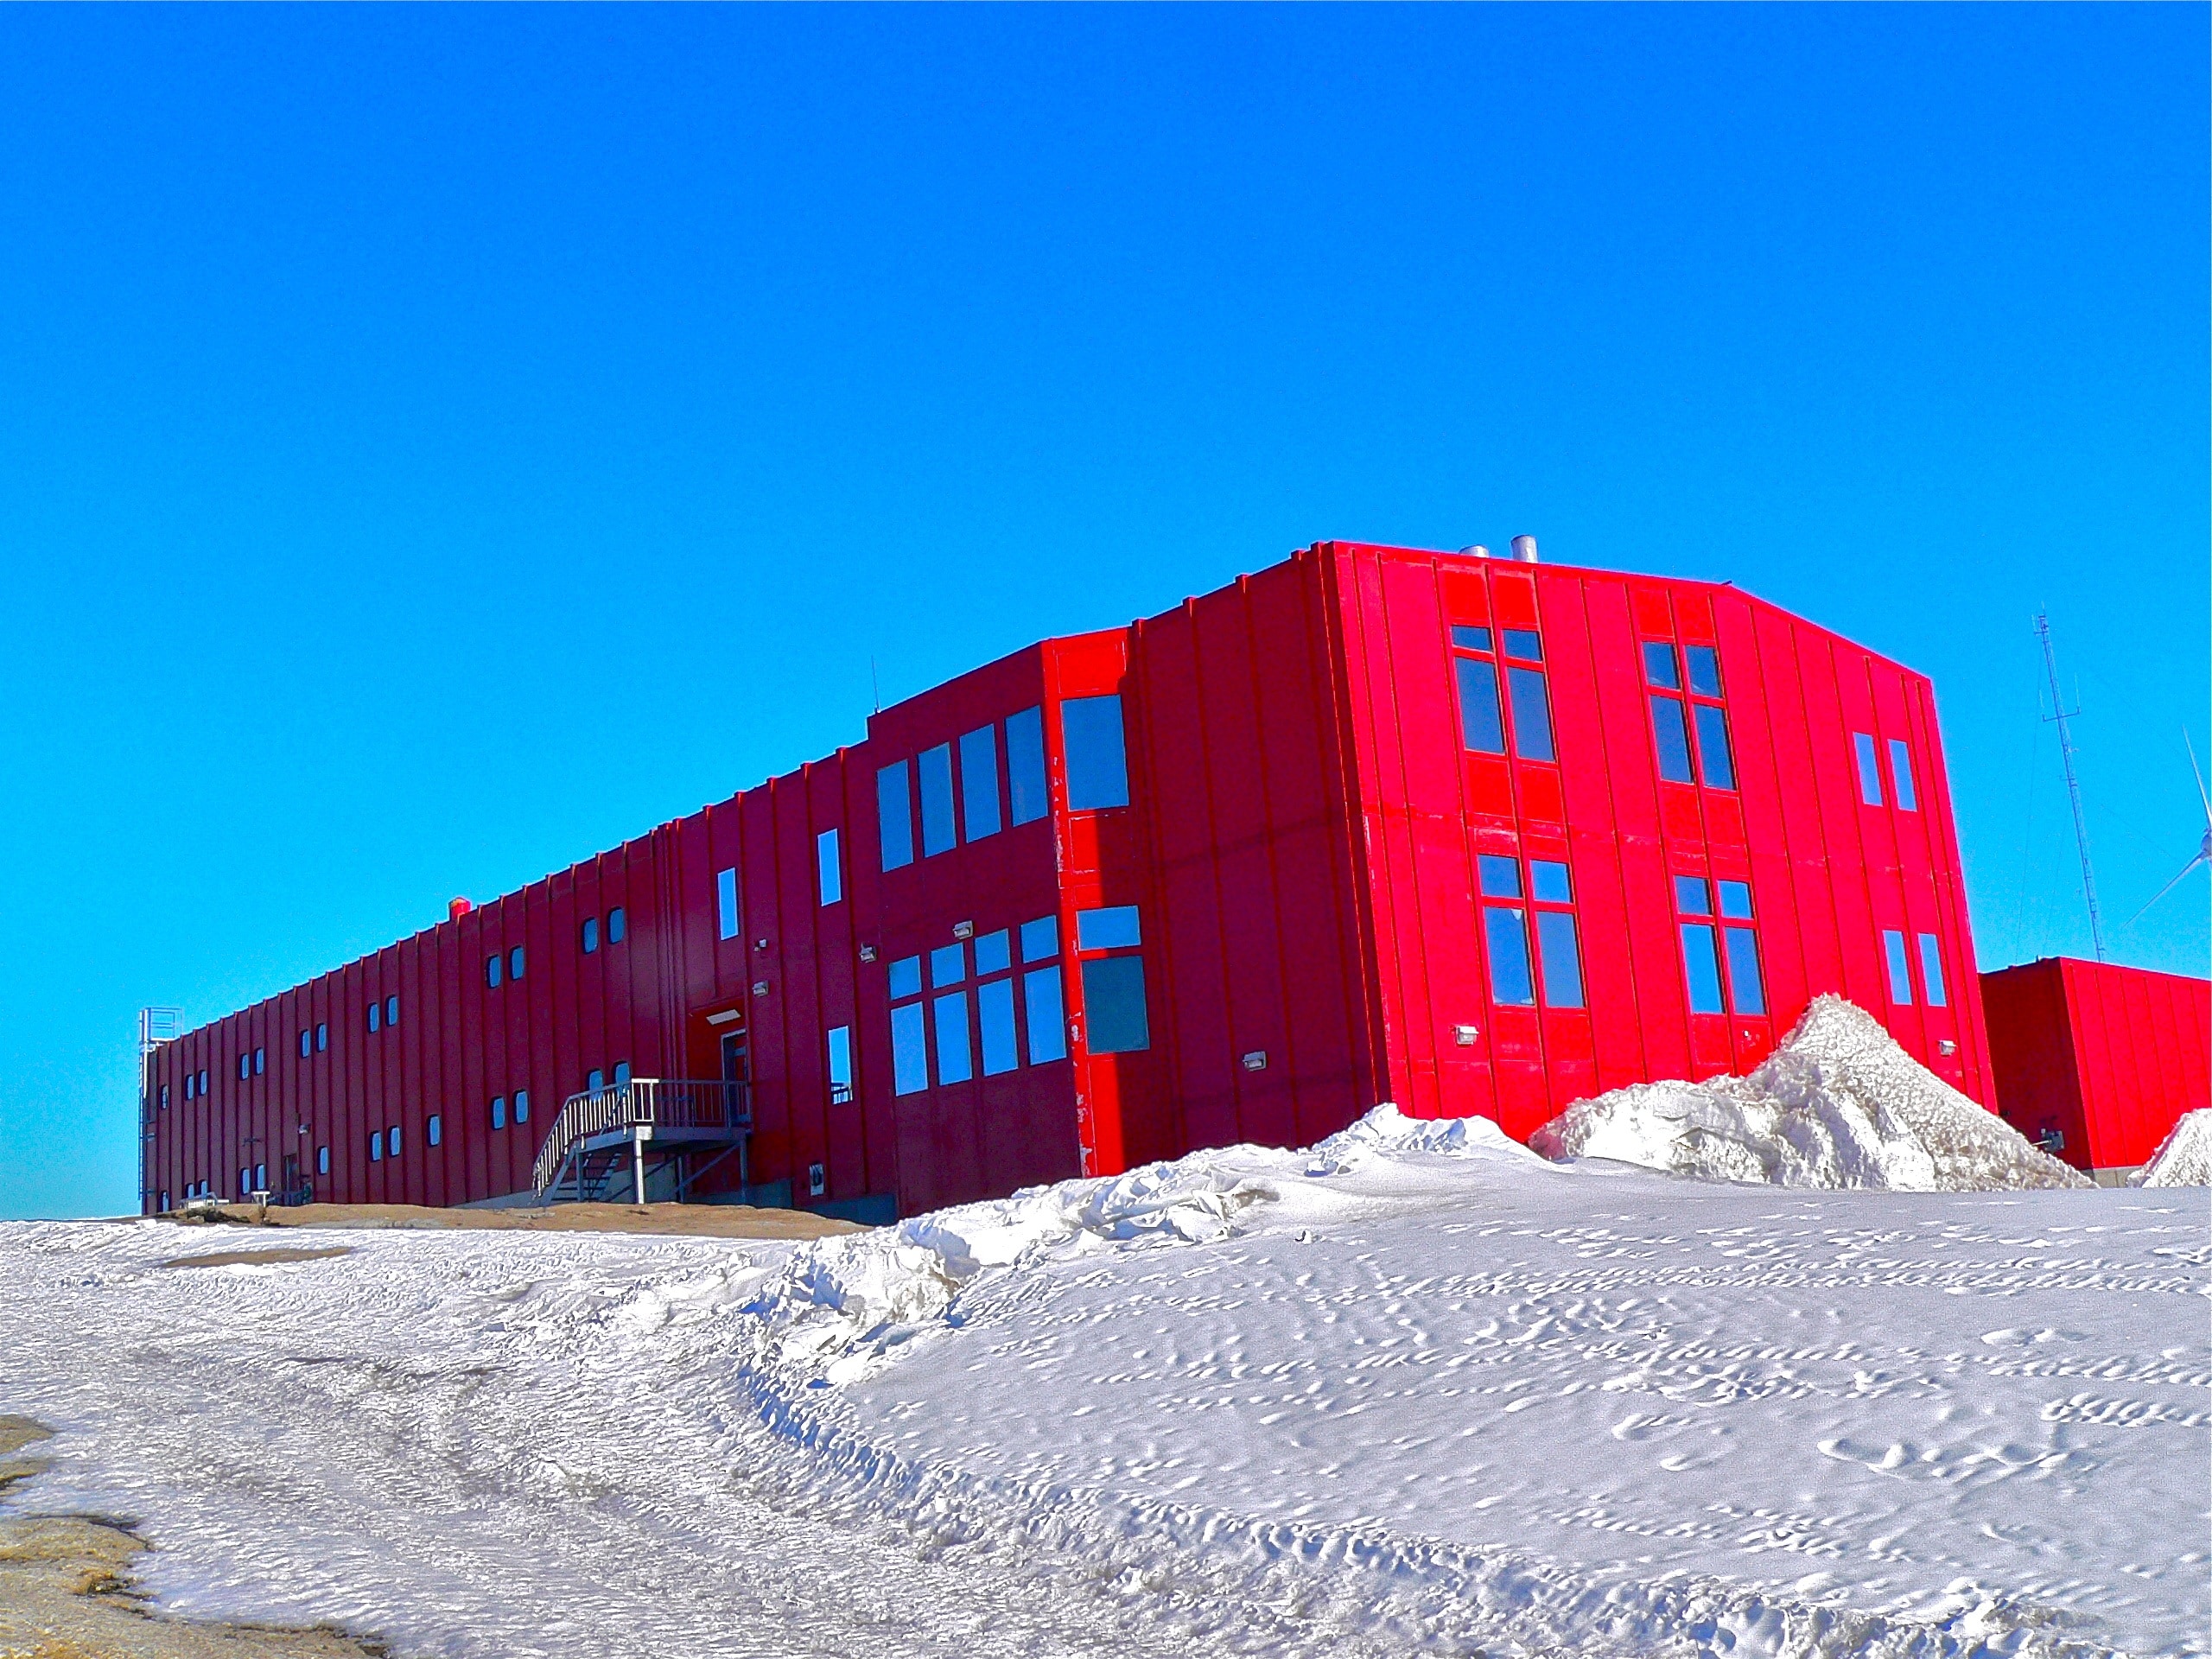 Research Station, Red, Building, red, winter